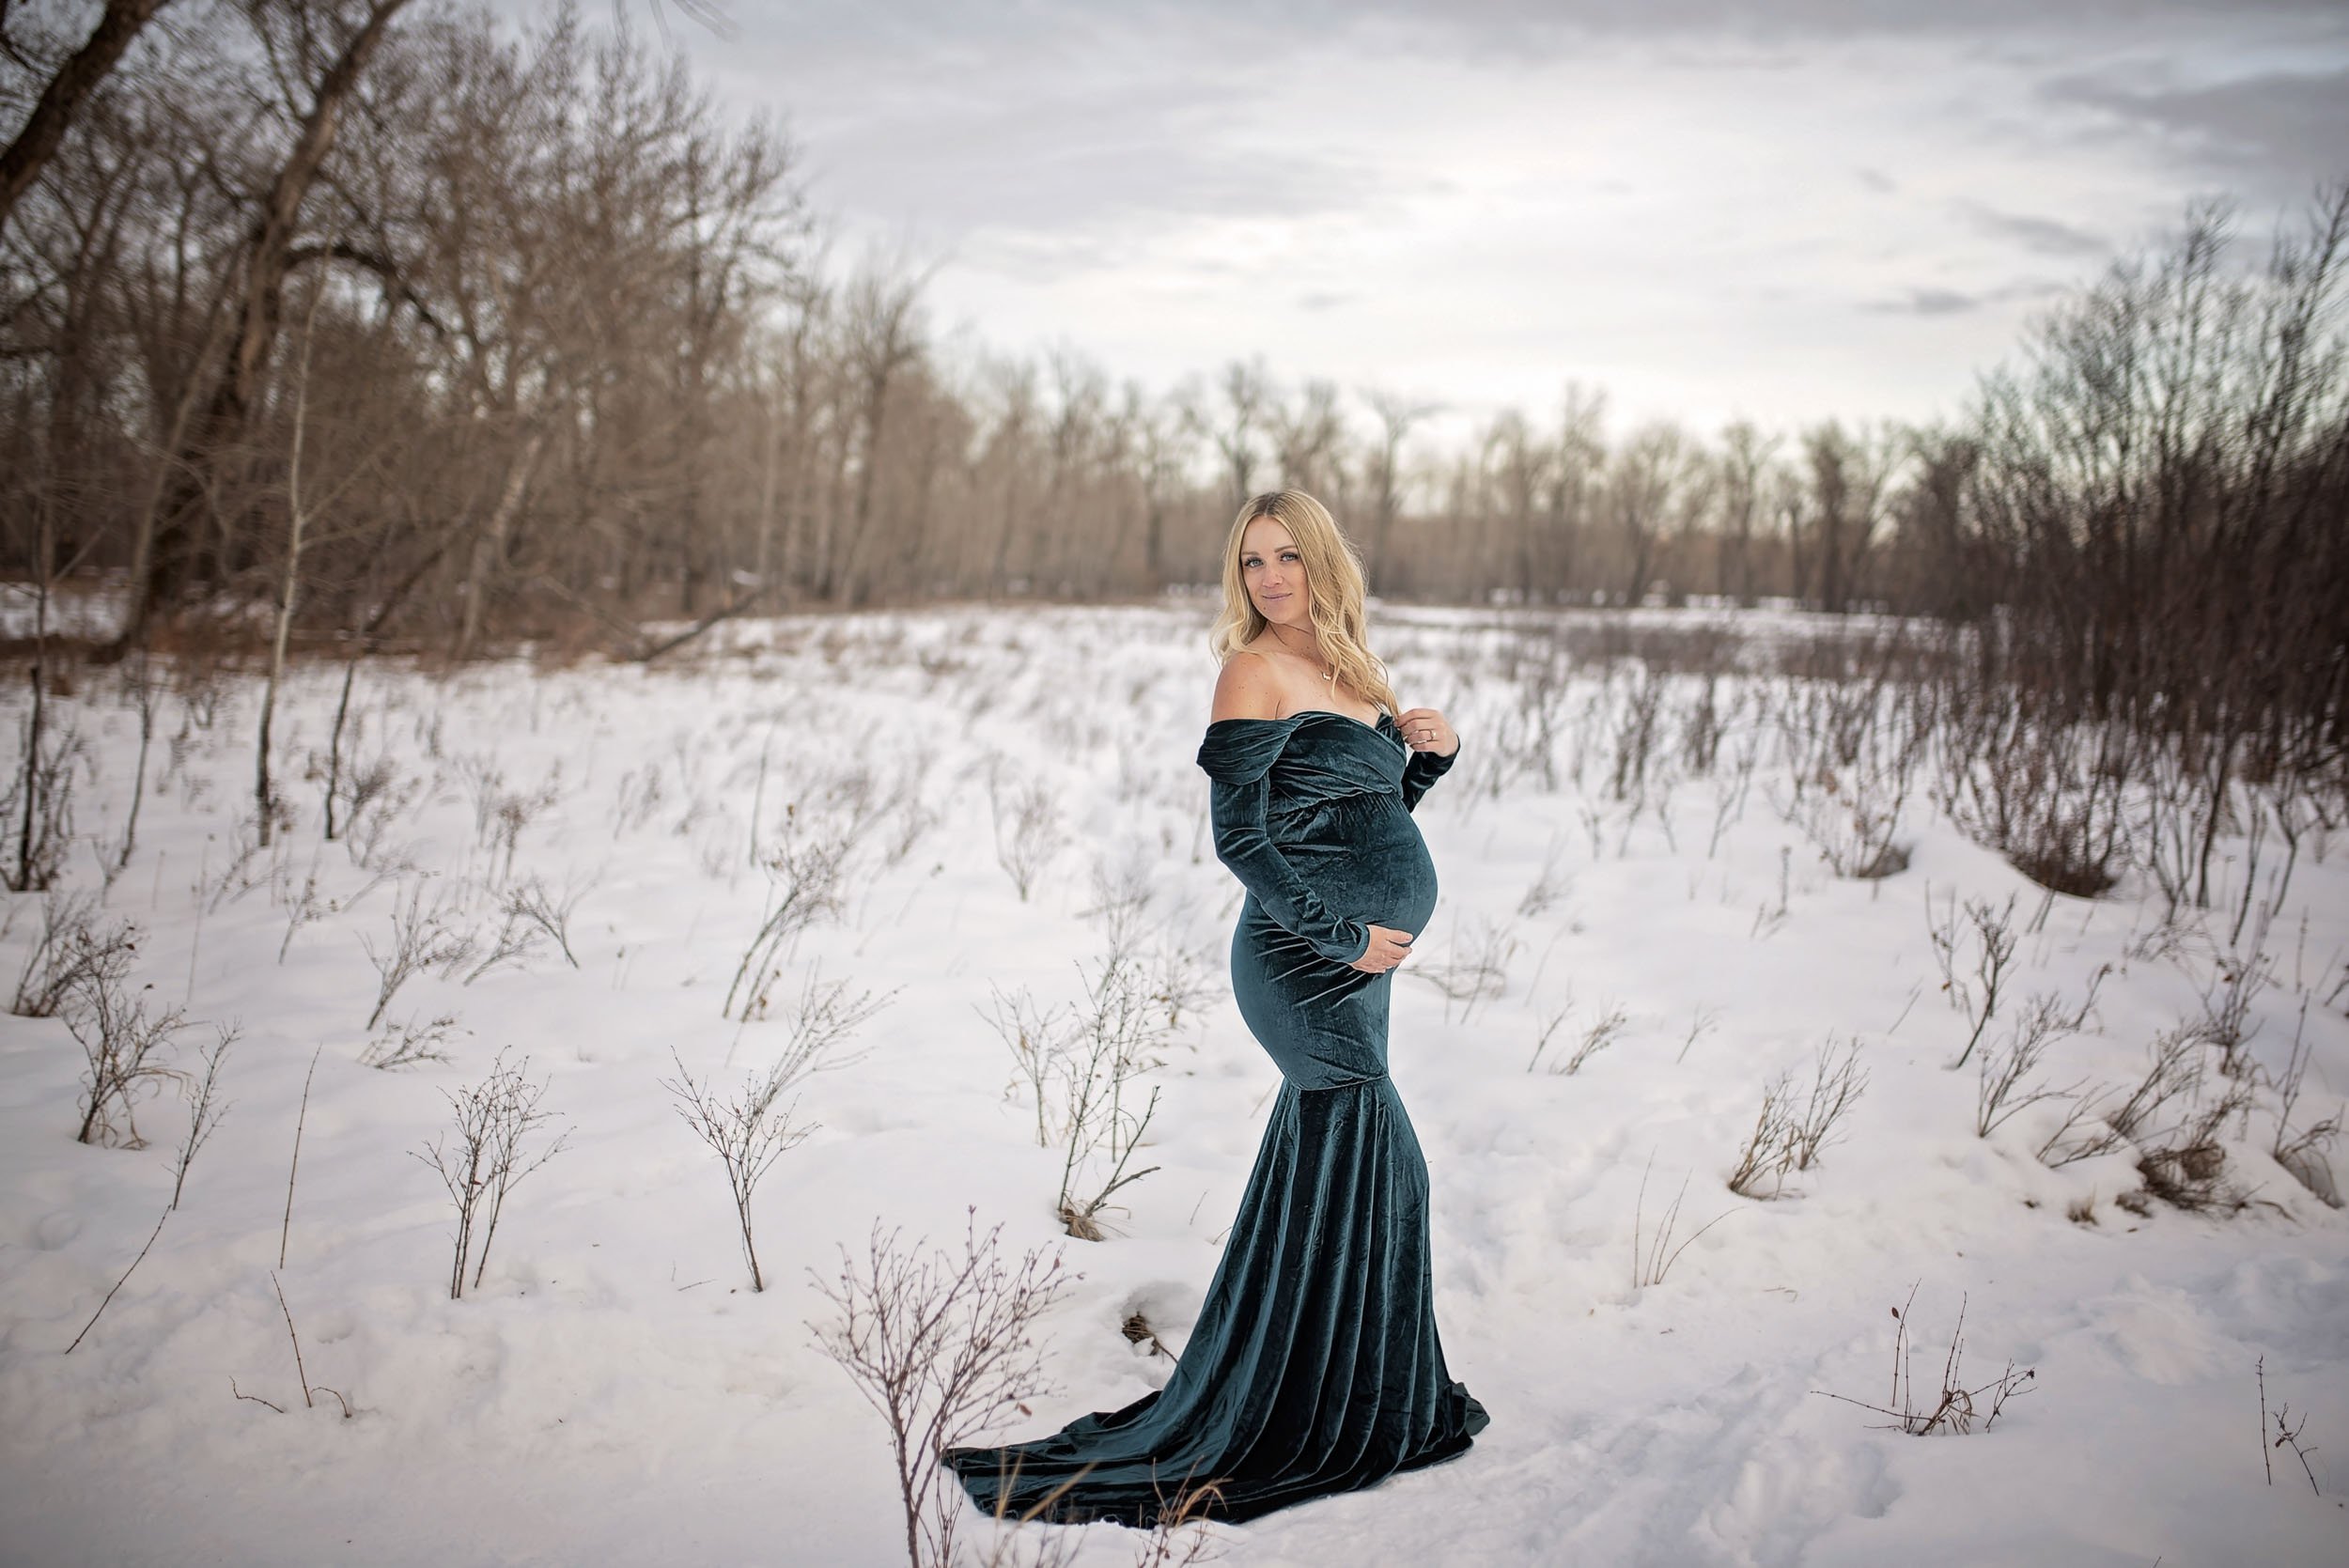 Lace and locket photo Airdrie Calgary Maternity Photographer-19.jpg